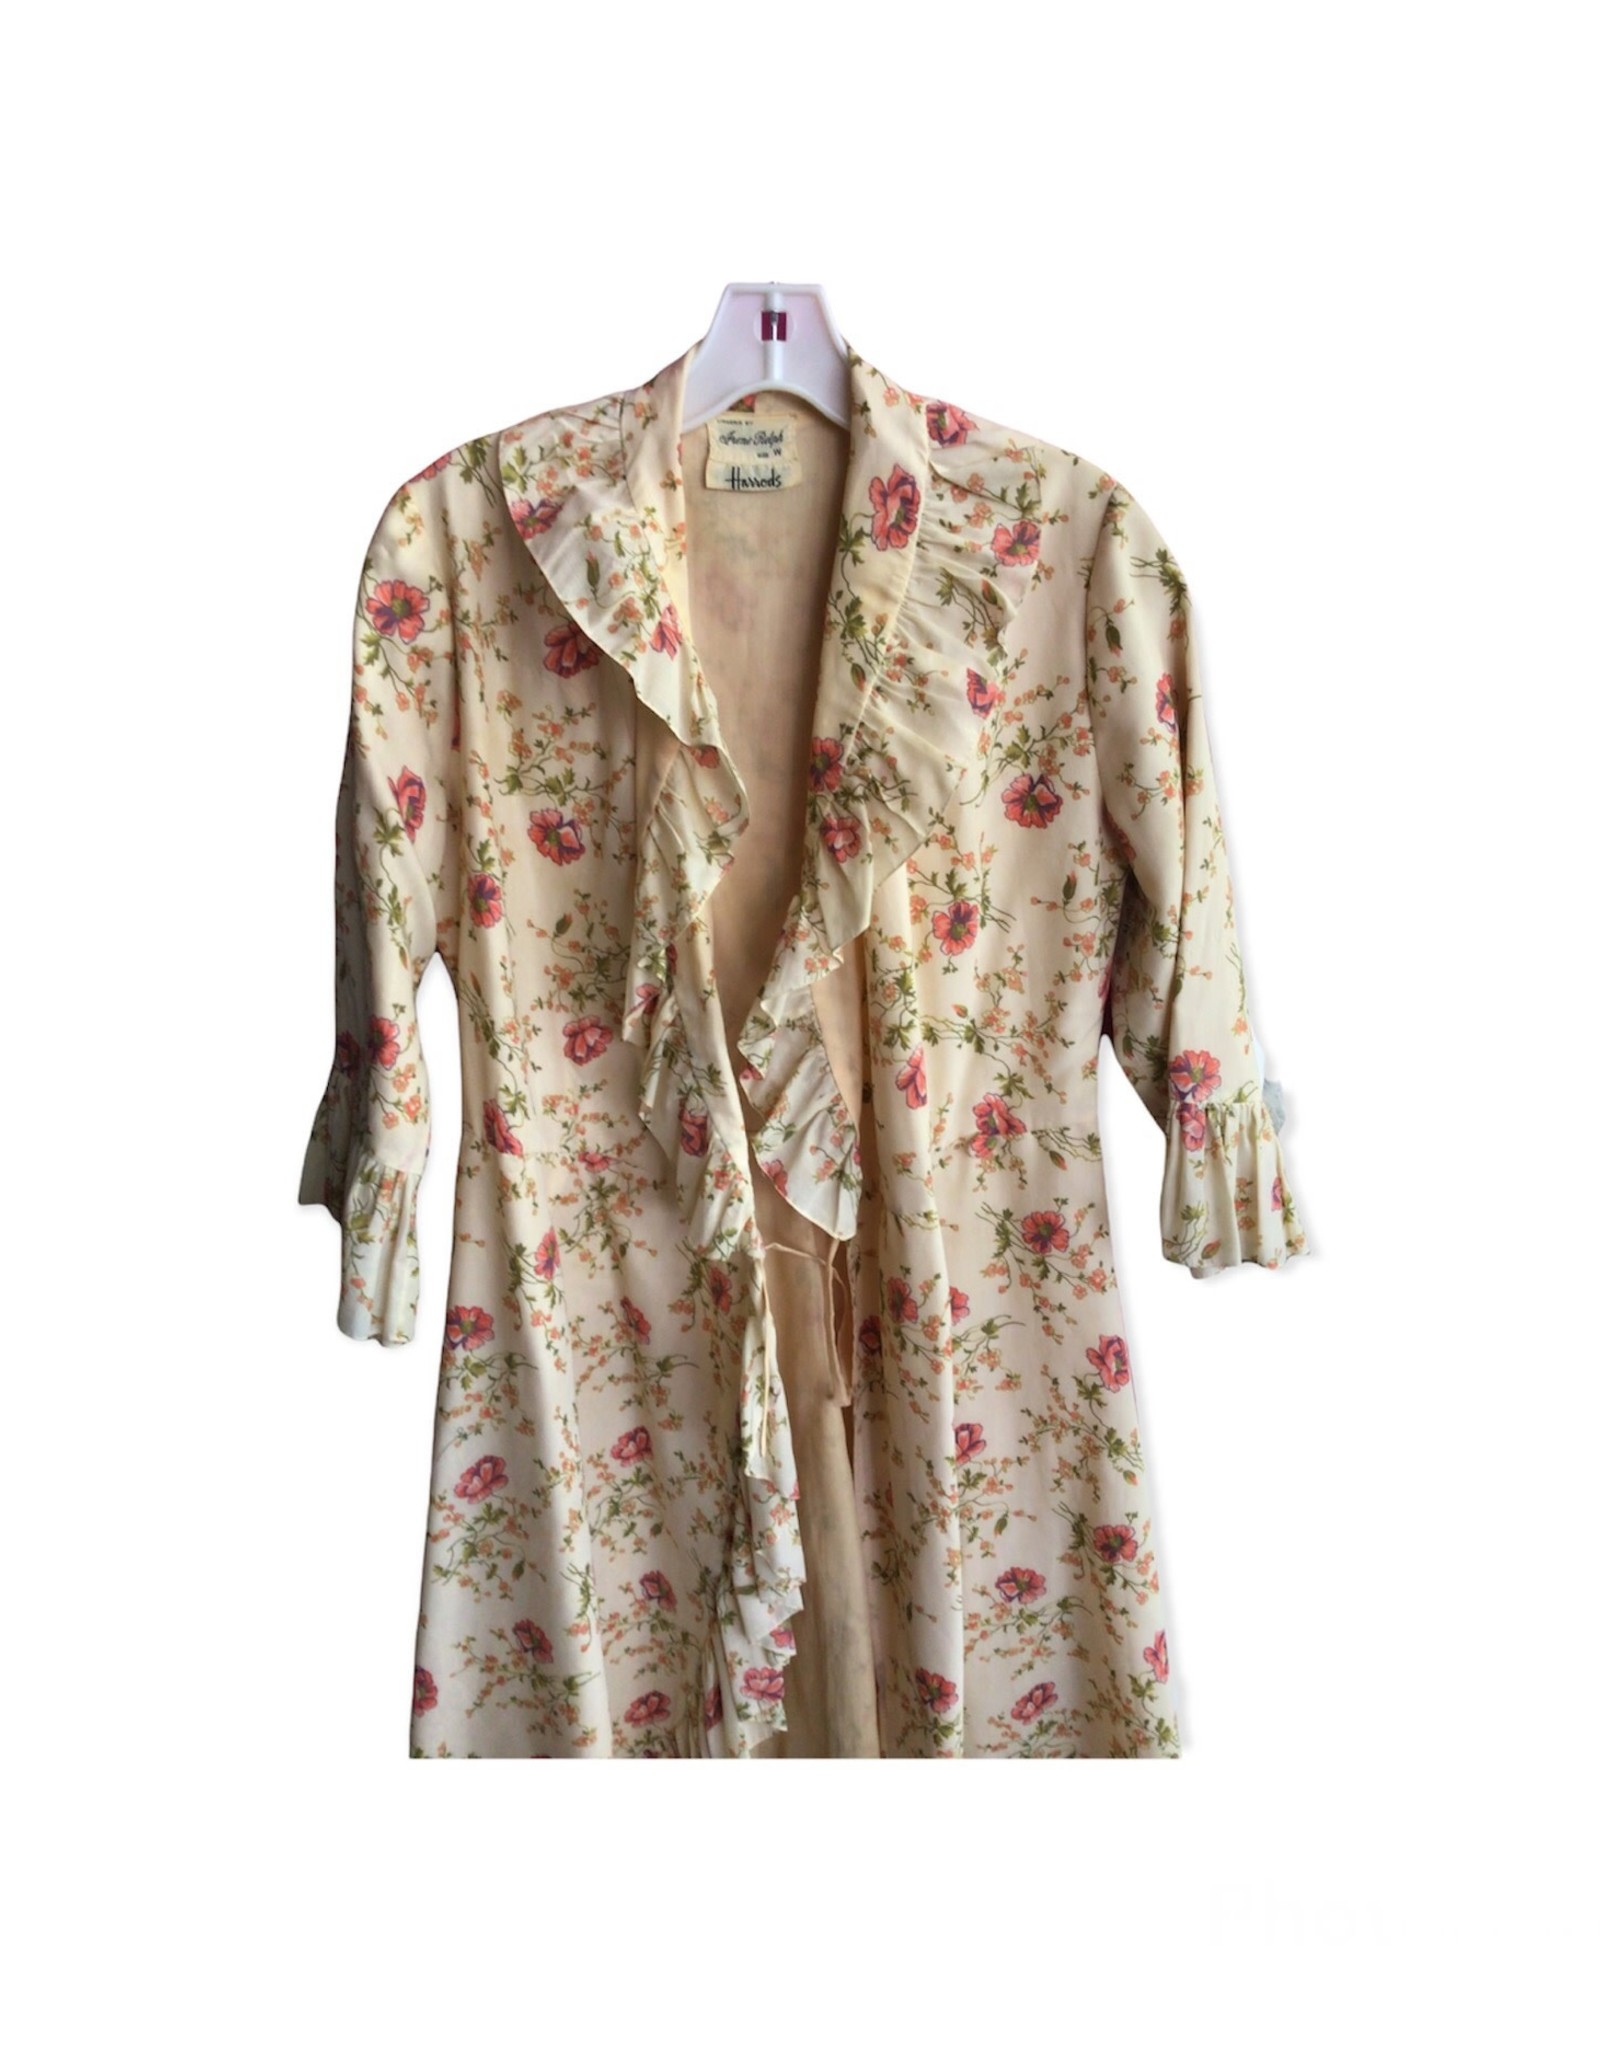 Harrods 60s floral print nightgown w/ drawstring and ruffle detail